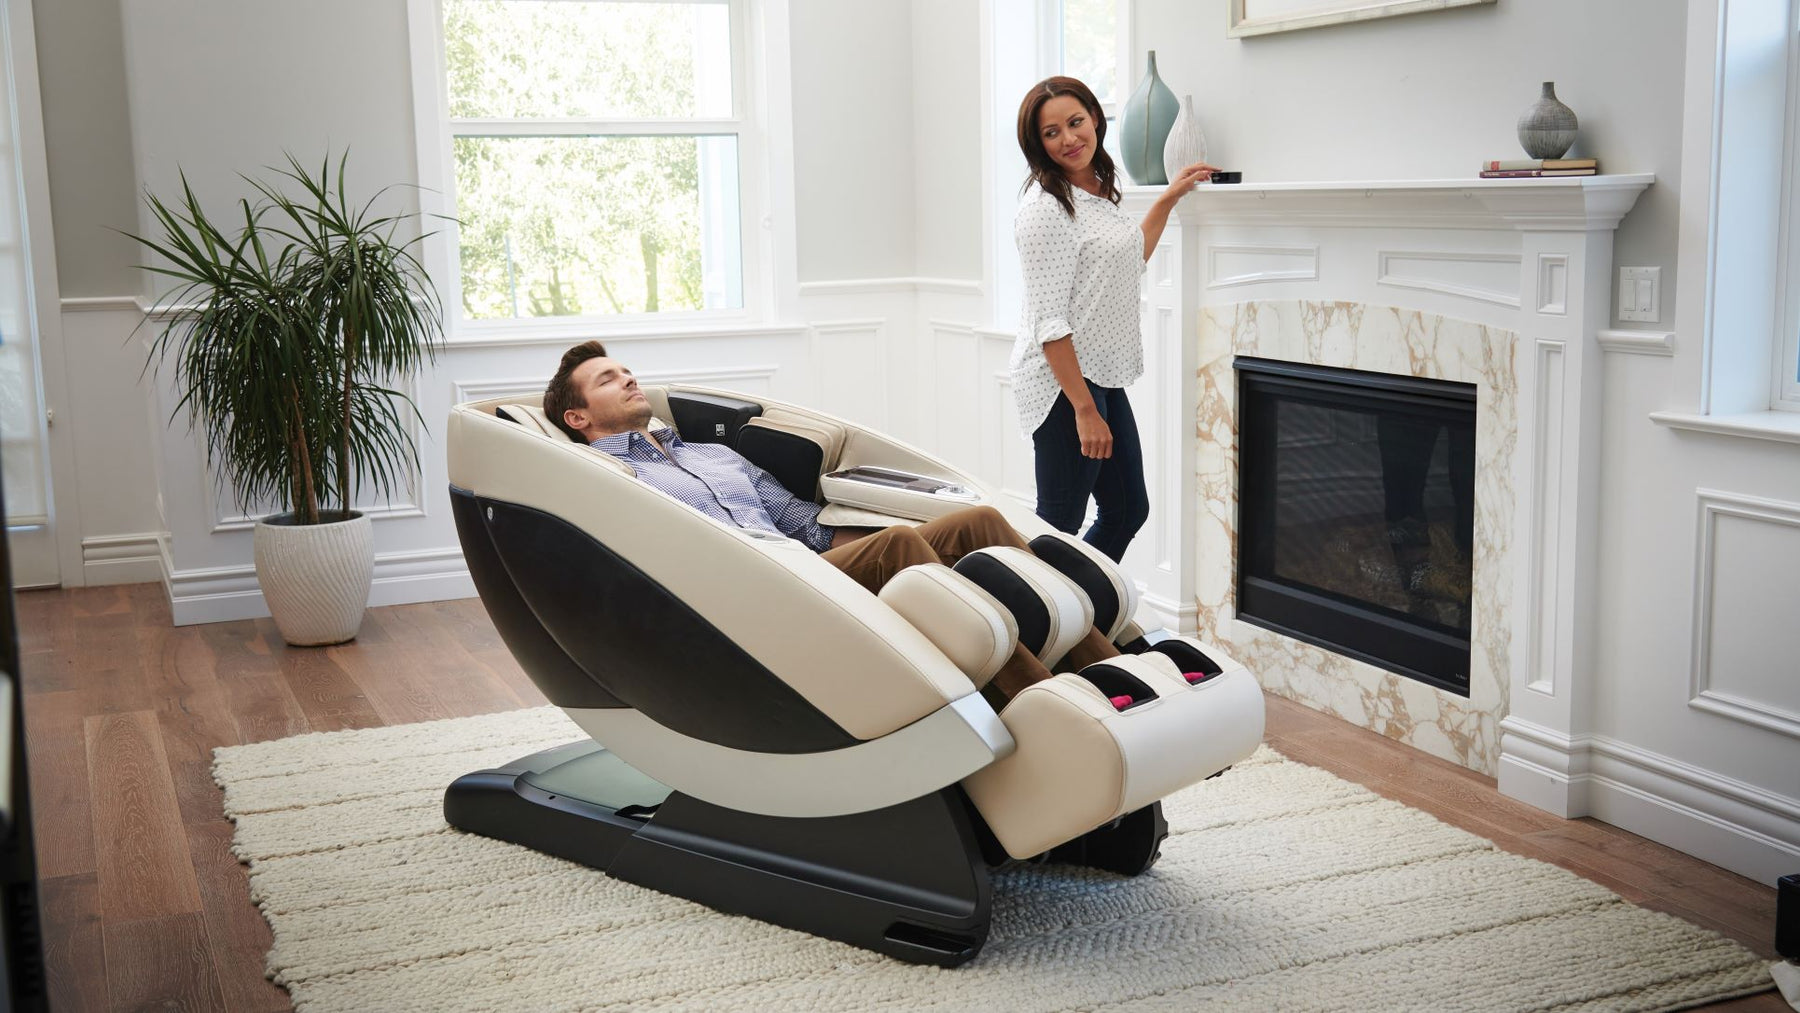 Man using a Human Touch Massage Chair and woman standing by him